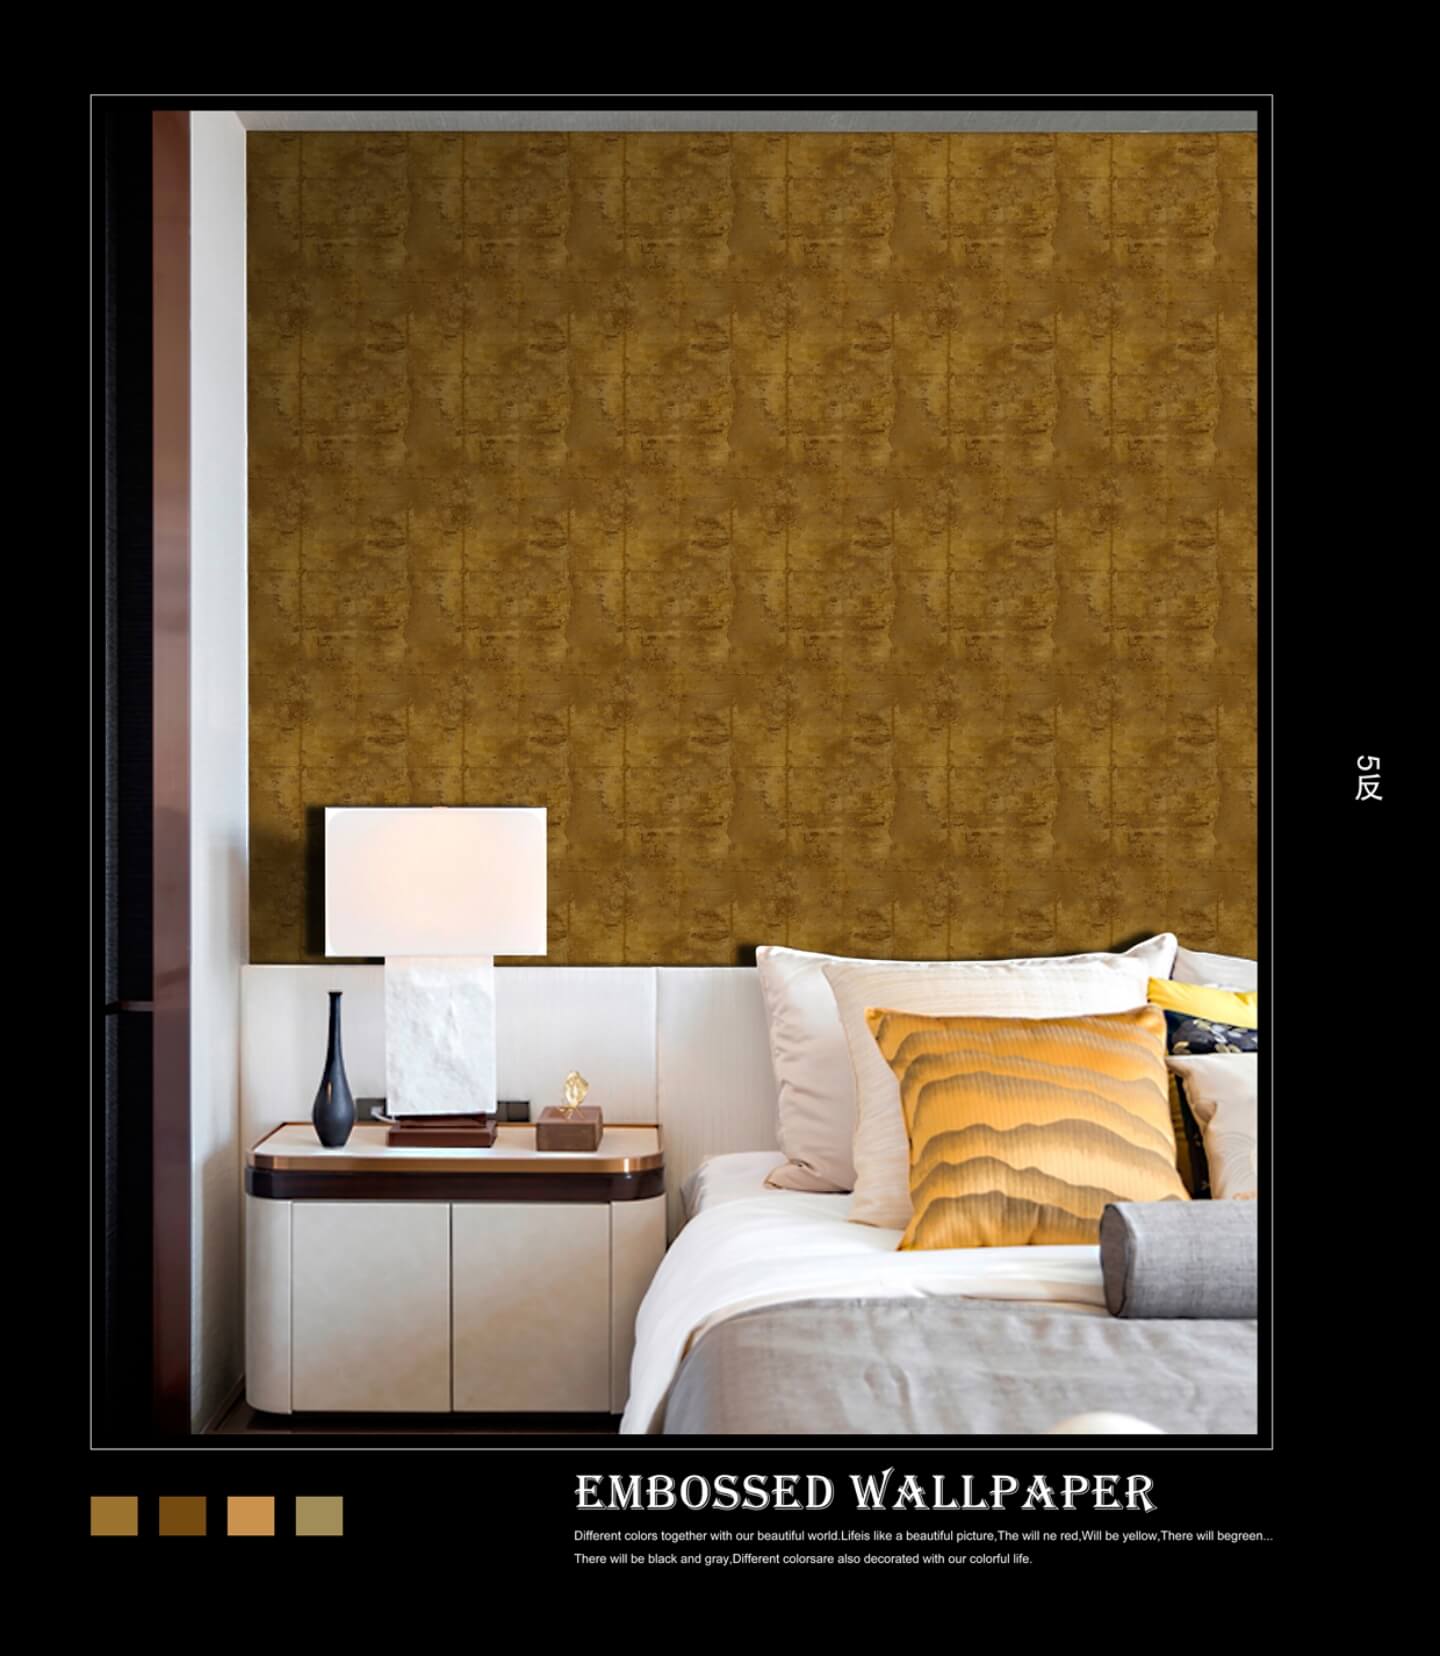 Multicolor Non-Adhesive 3D Designer Wallpaper Suitable For Bedroom, Living Room, Office, High-Quality PVC Water-resistant Wallpapers (18)